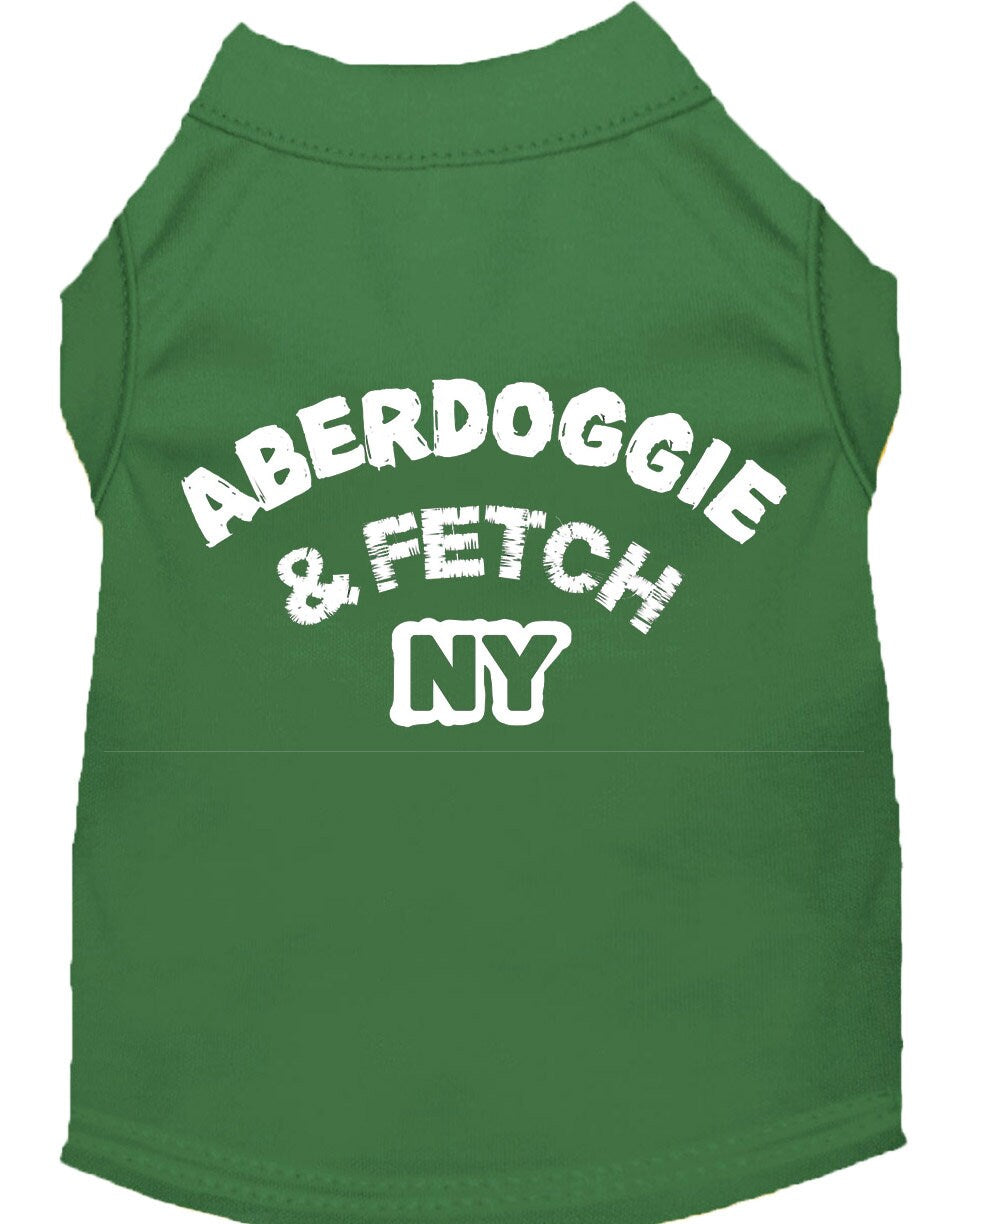 Pet Dog & Cat Shirt Screen Printed, "Aberdoggie and Fetch NY"